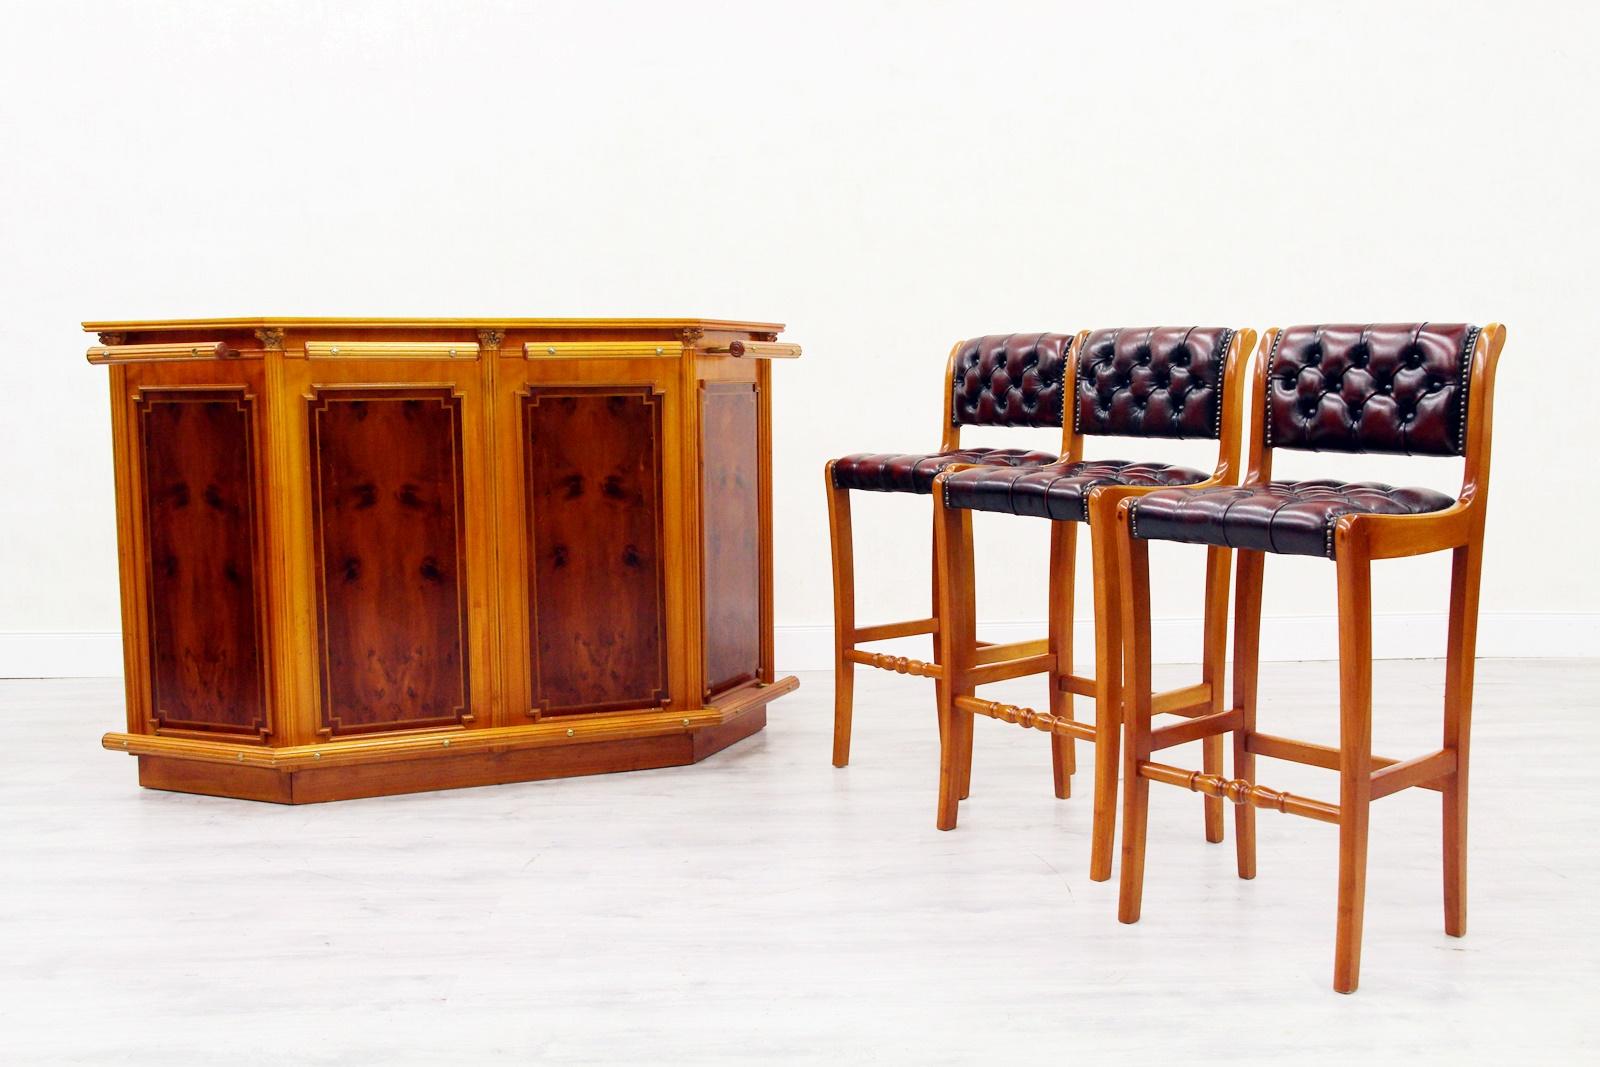 Chesterfield house bar with 3 stools
in original design 1970-1980.

Condition: The bar and stools are in very good condition
bar
Height x 104cm, length x 163cm, depth x 67cm
stool
Height x 99cm seat height x 72cm width x 43cm depth x